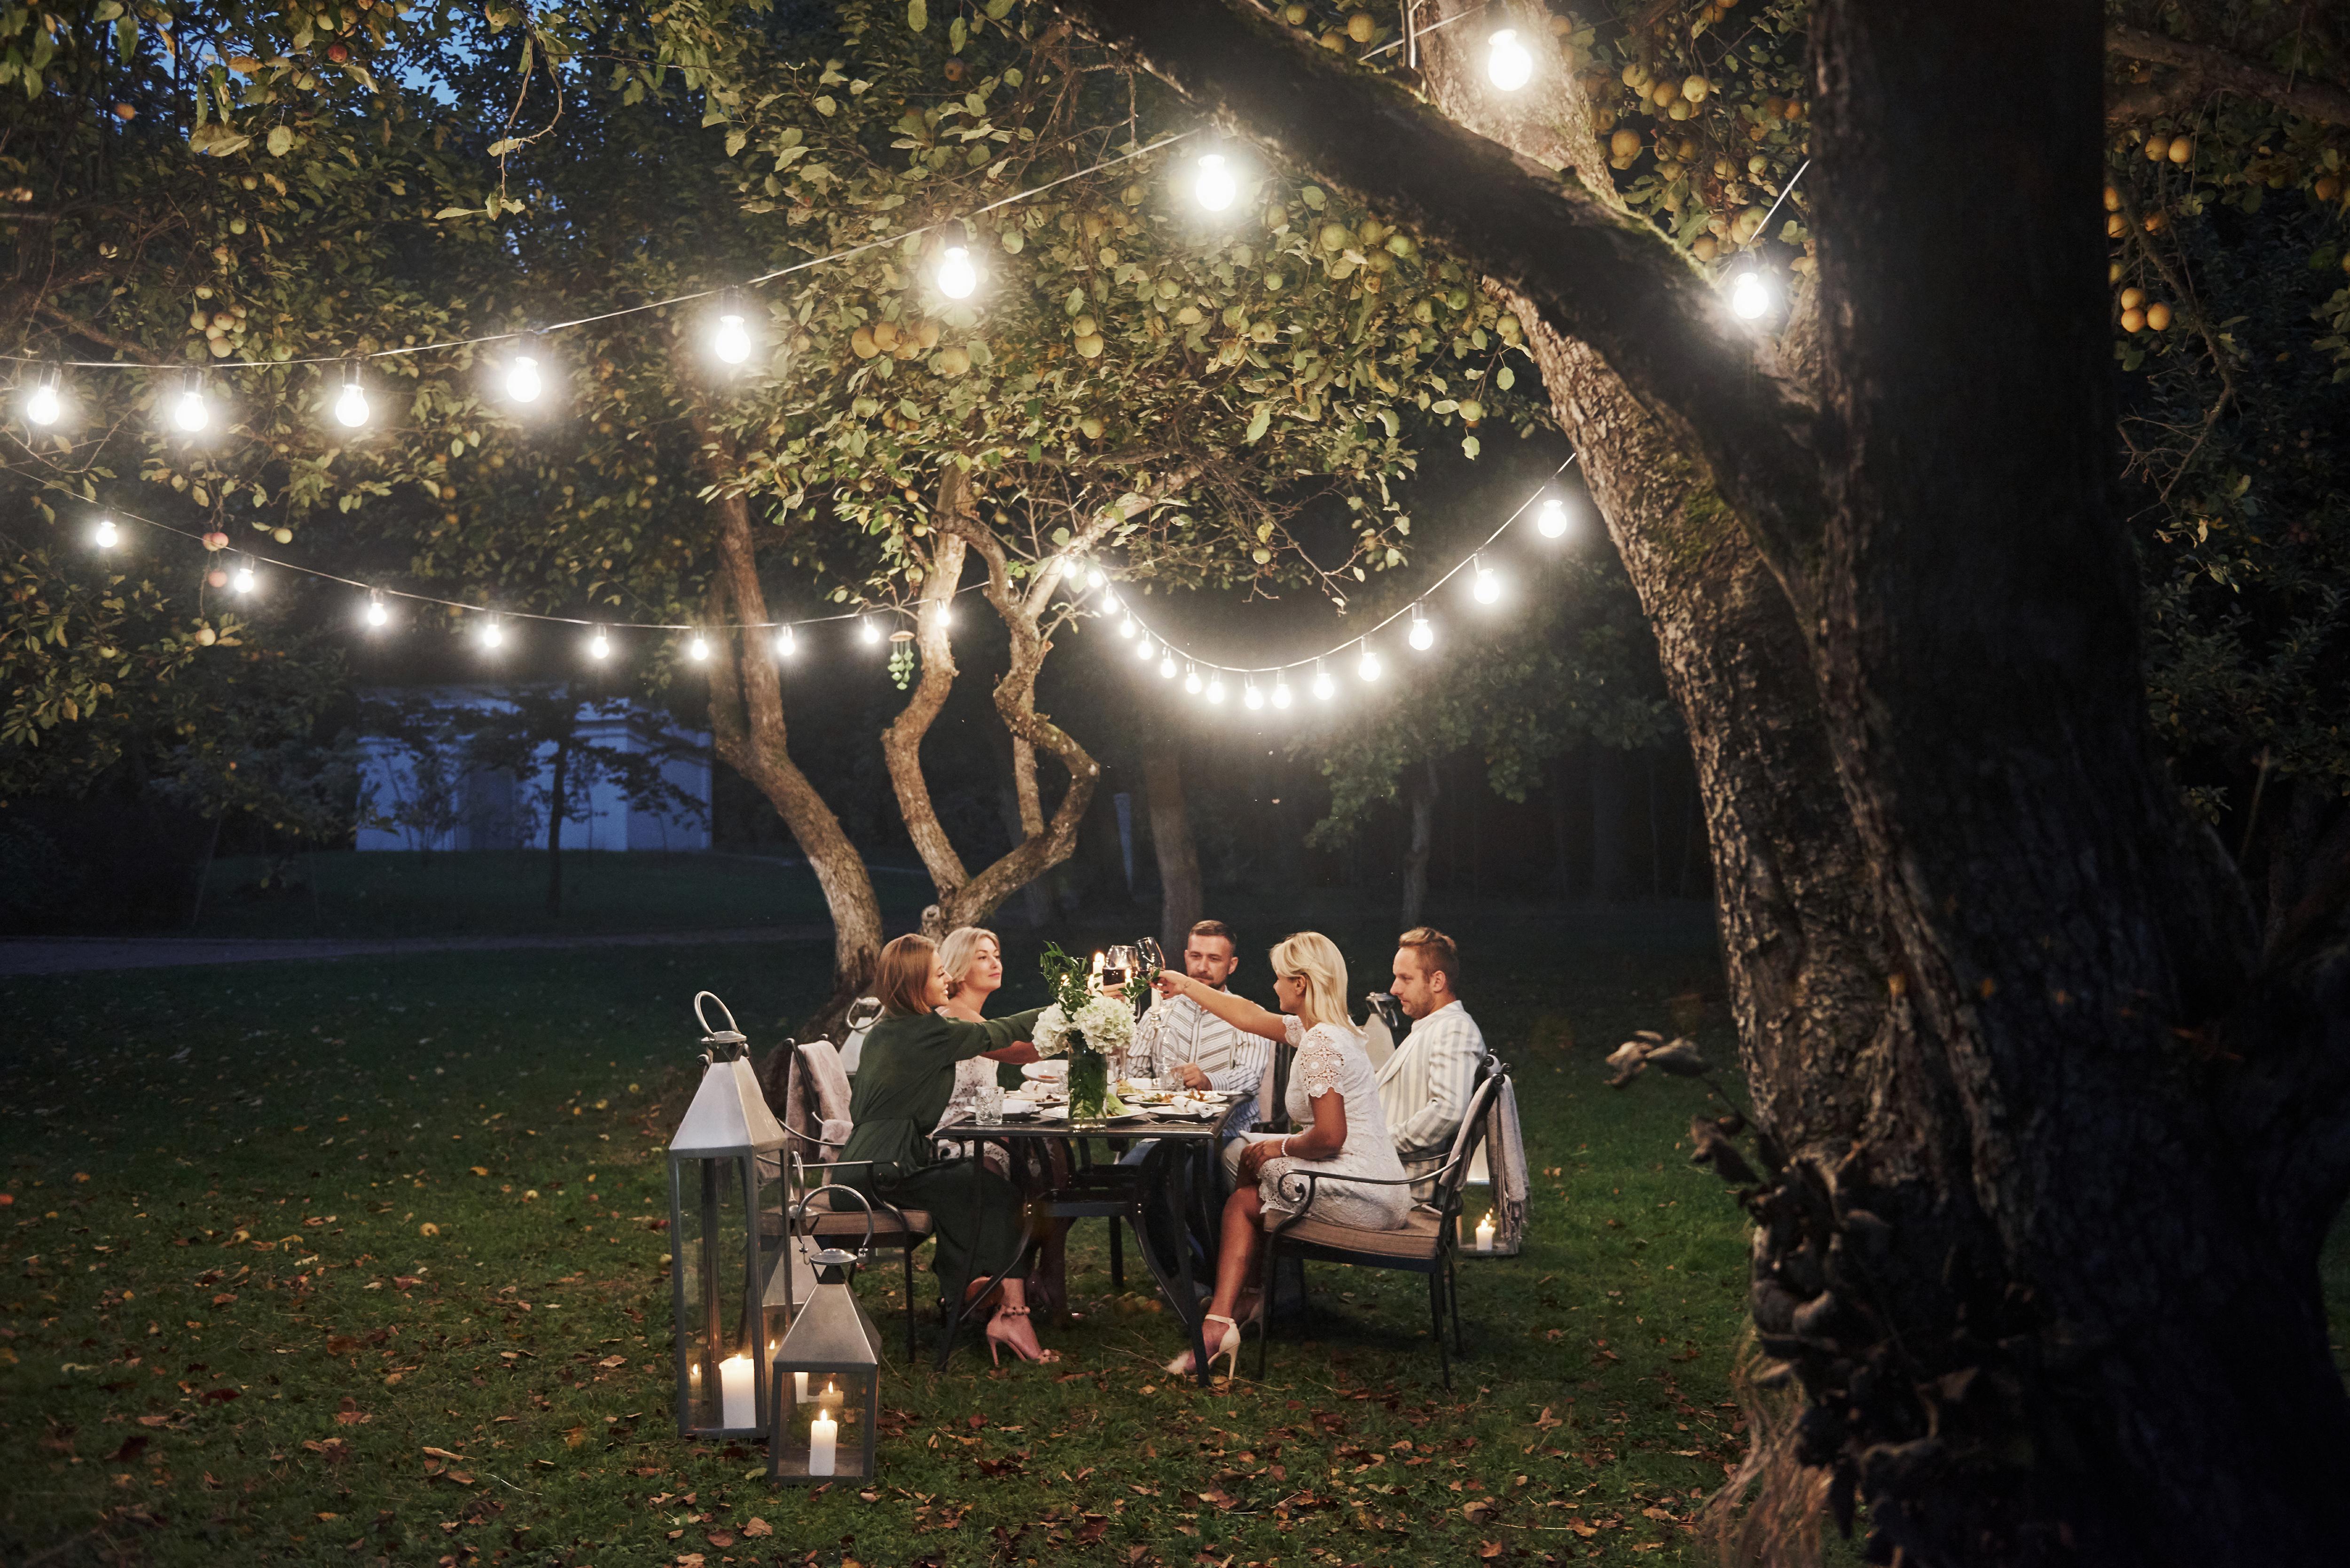 Outdoor lighting ideas and tips